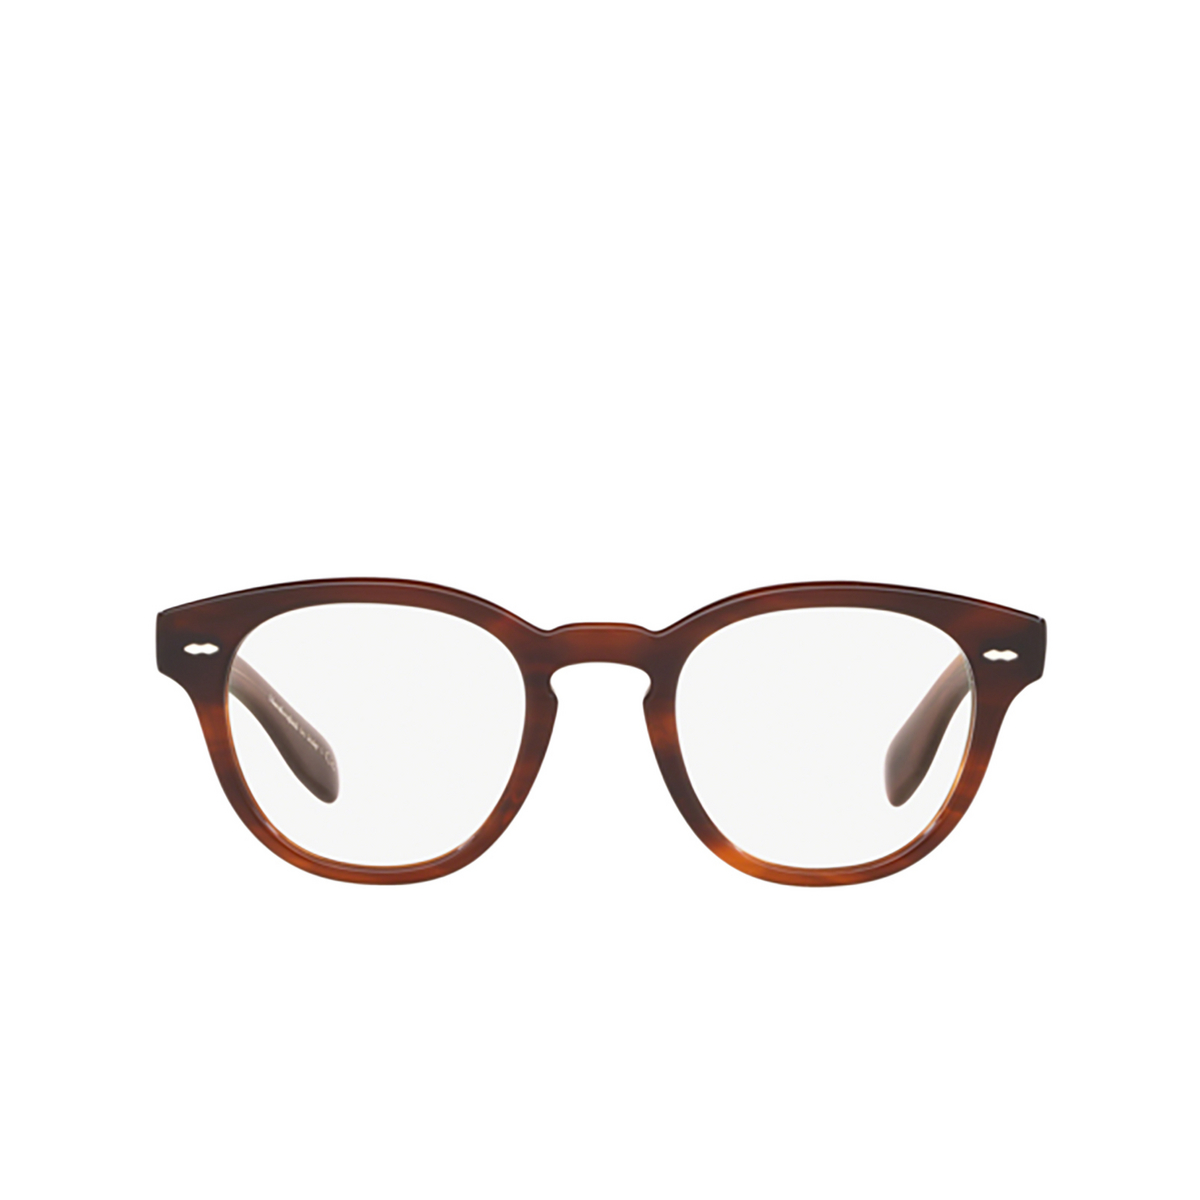 Oliver Peoples CARY GRANT Eyeglasses 1679 Grant Tortoise - front view